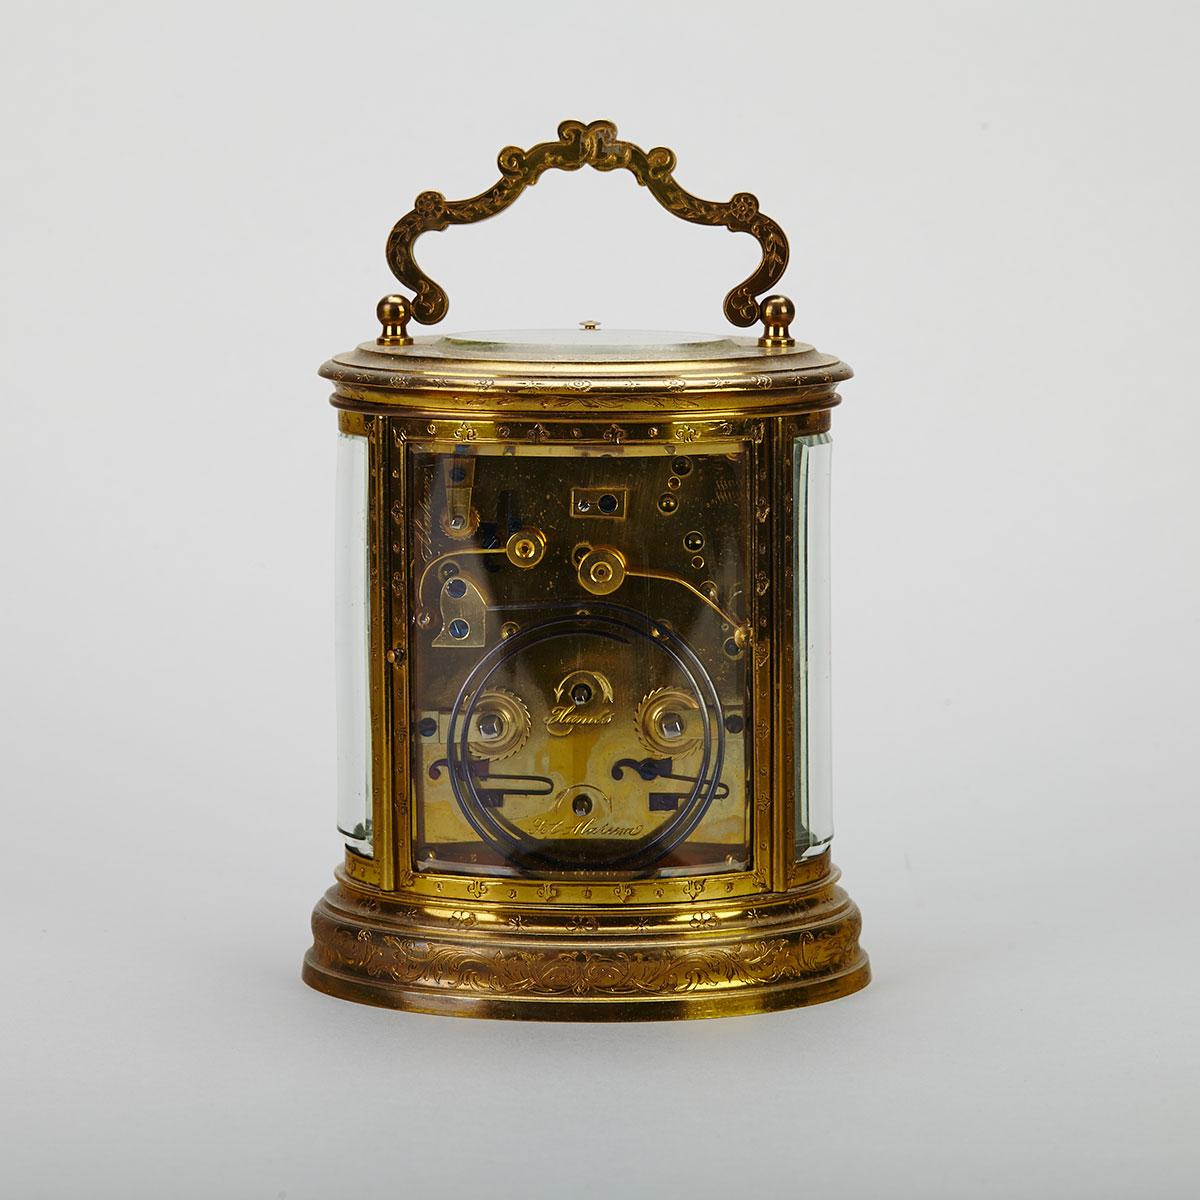 French Oval Repeating Carriage Clock with Alarm, c.1870